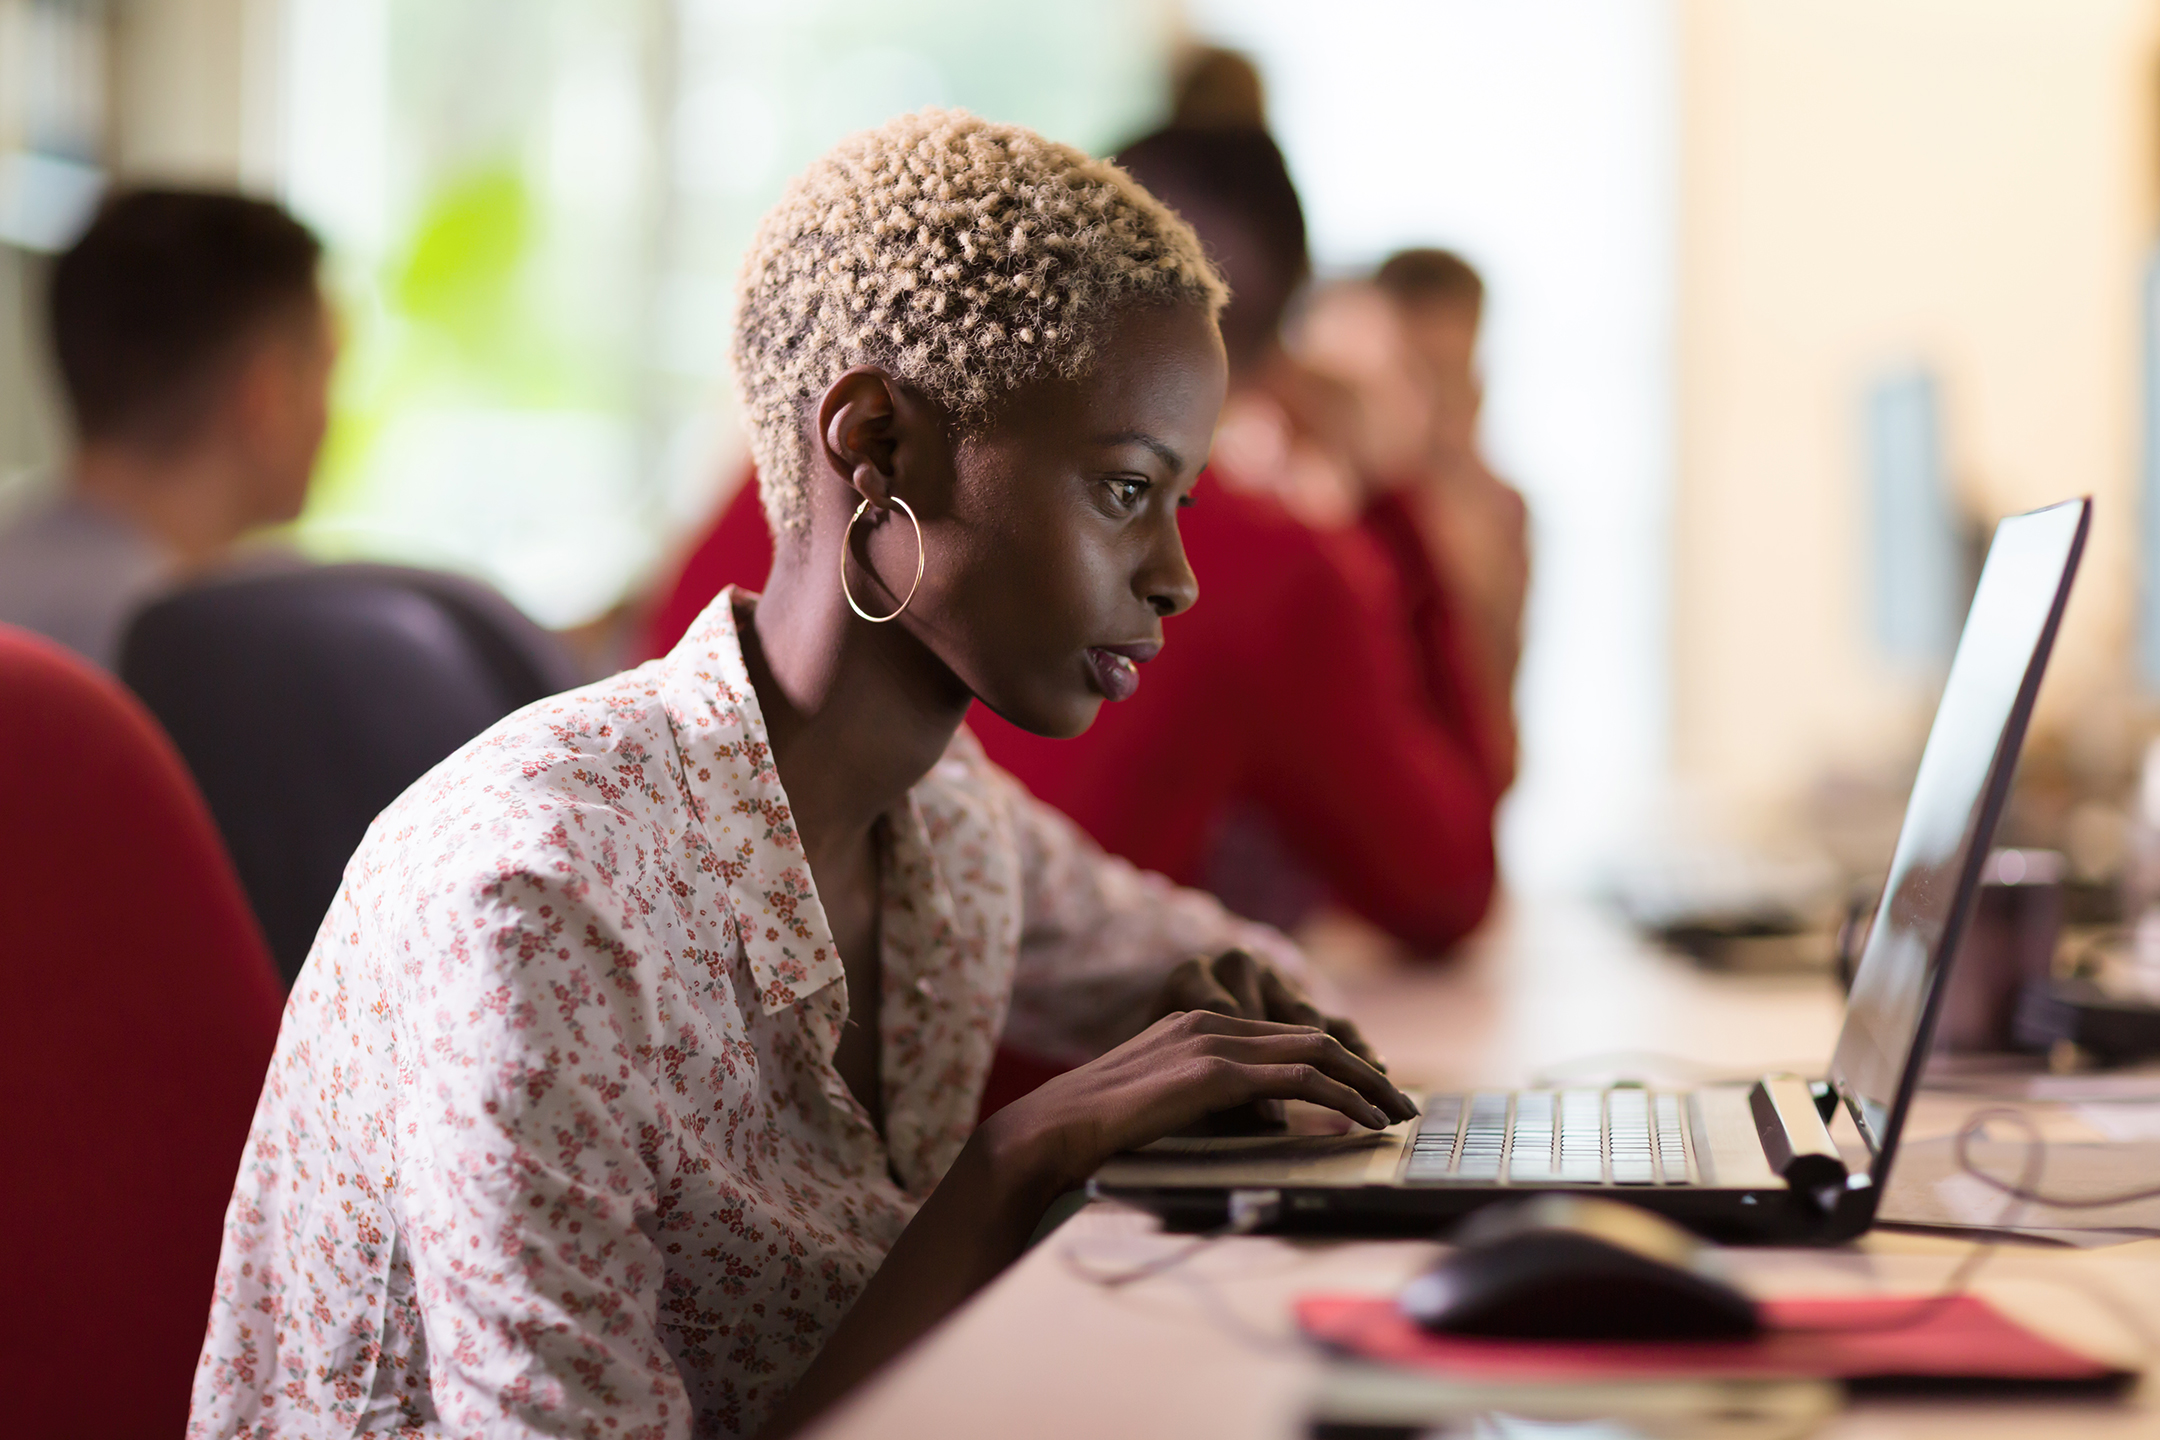 Young black woman with short hair working on a computer